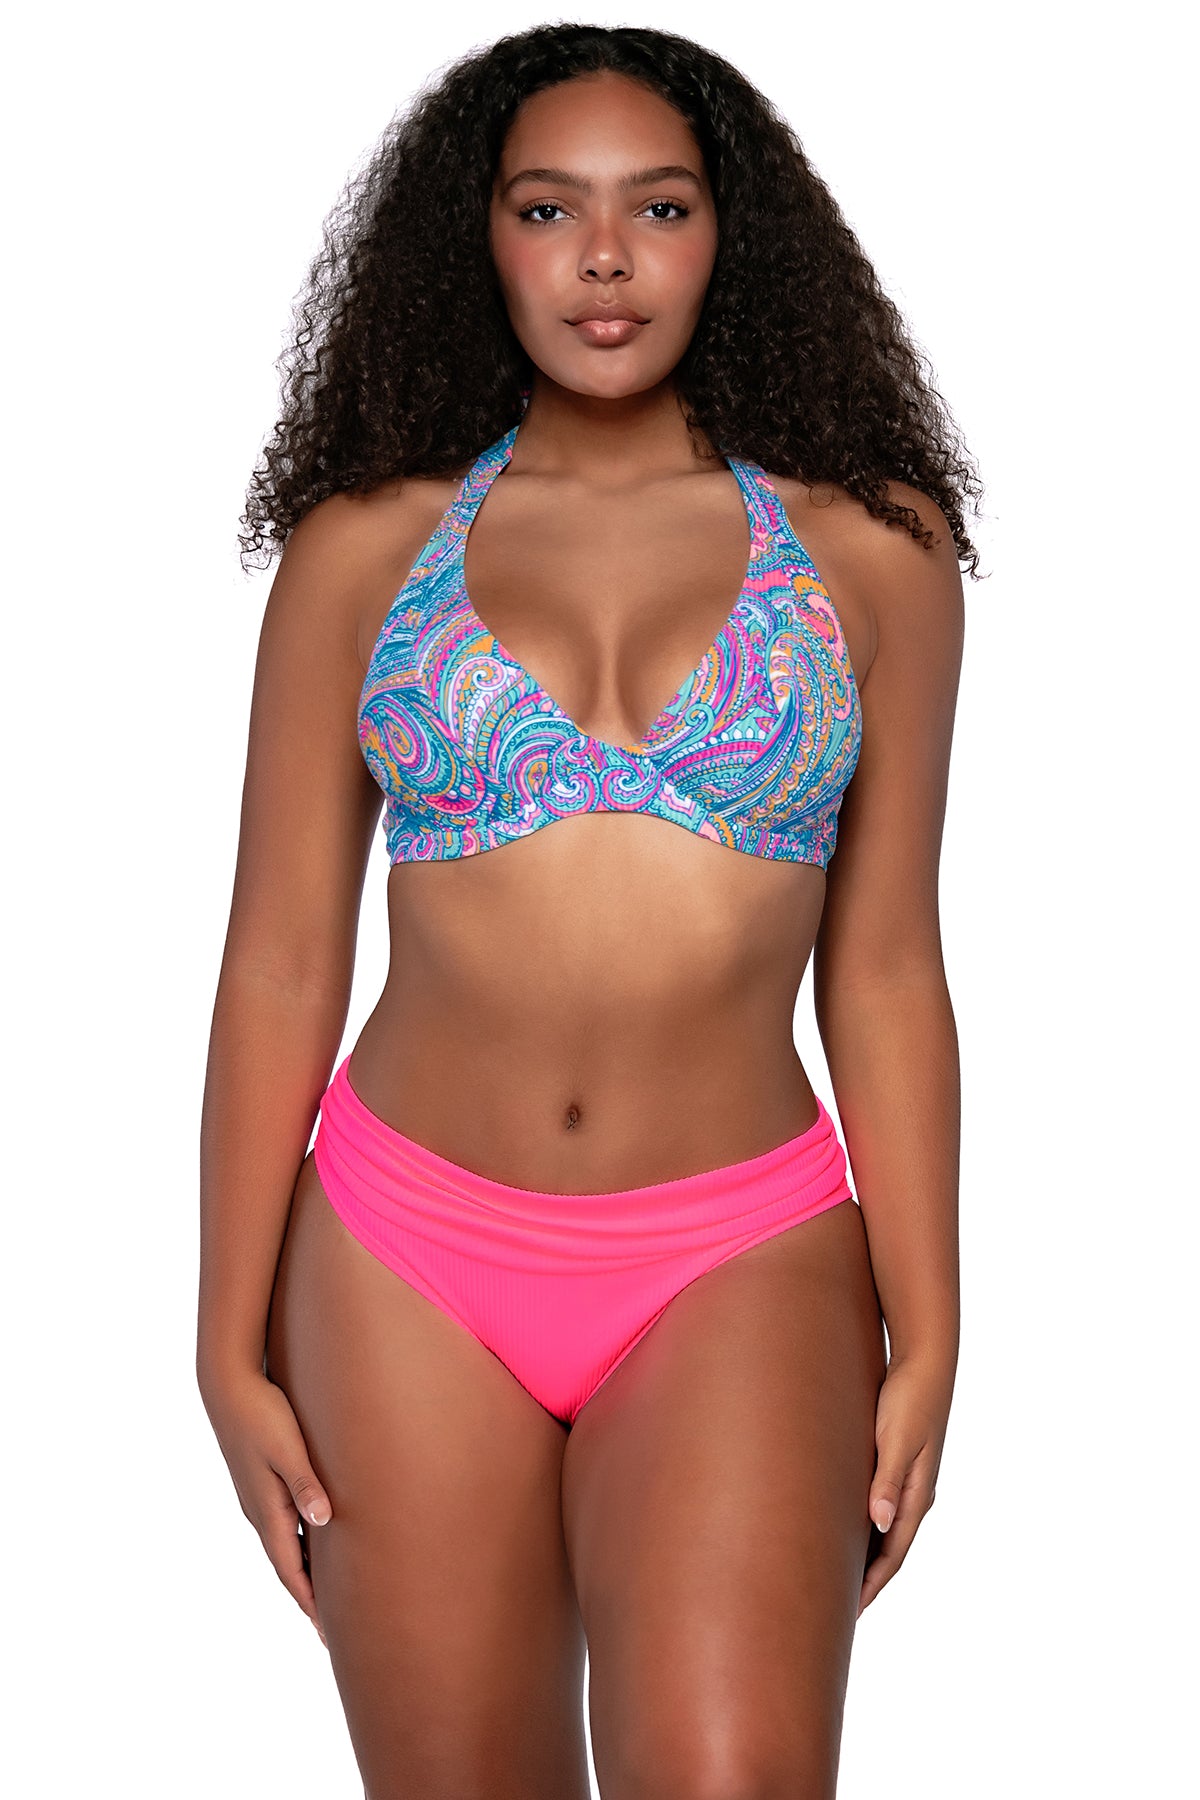 Front view of Sunsets Paisley Pop Muse Halter Top with matching Unforgettable Bottom bikini